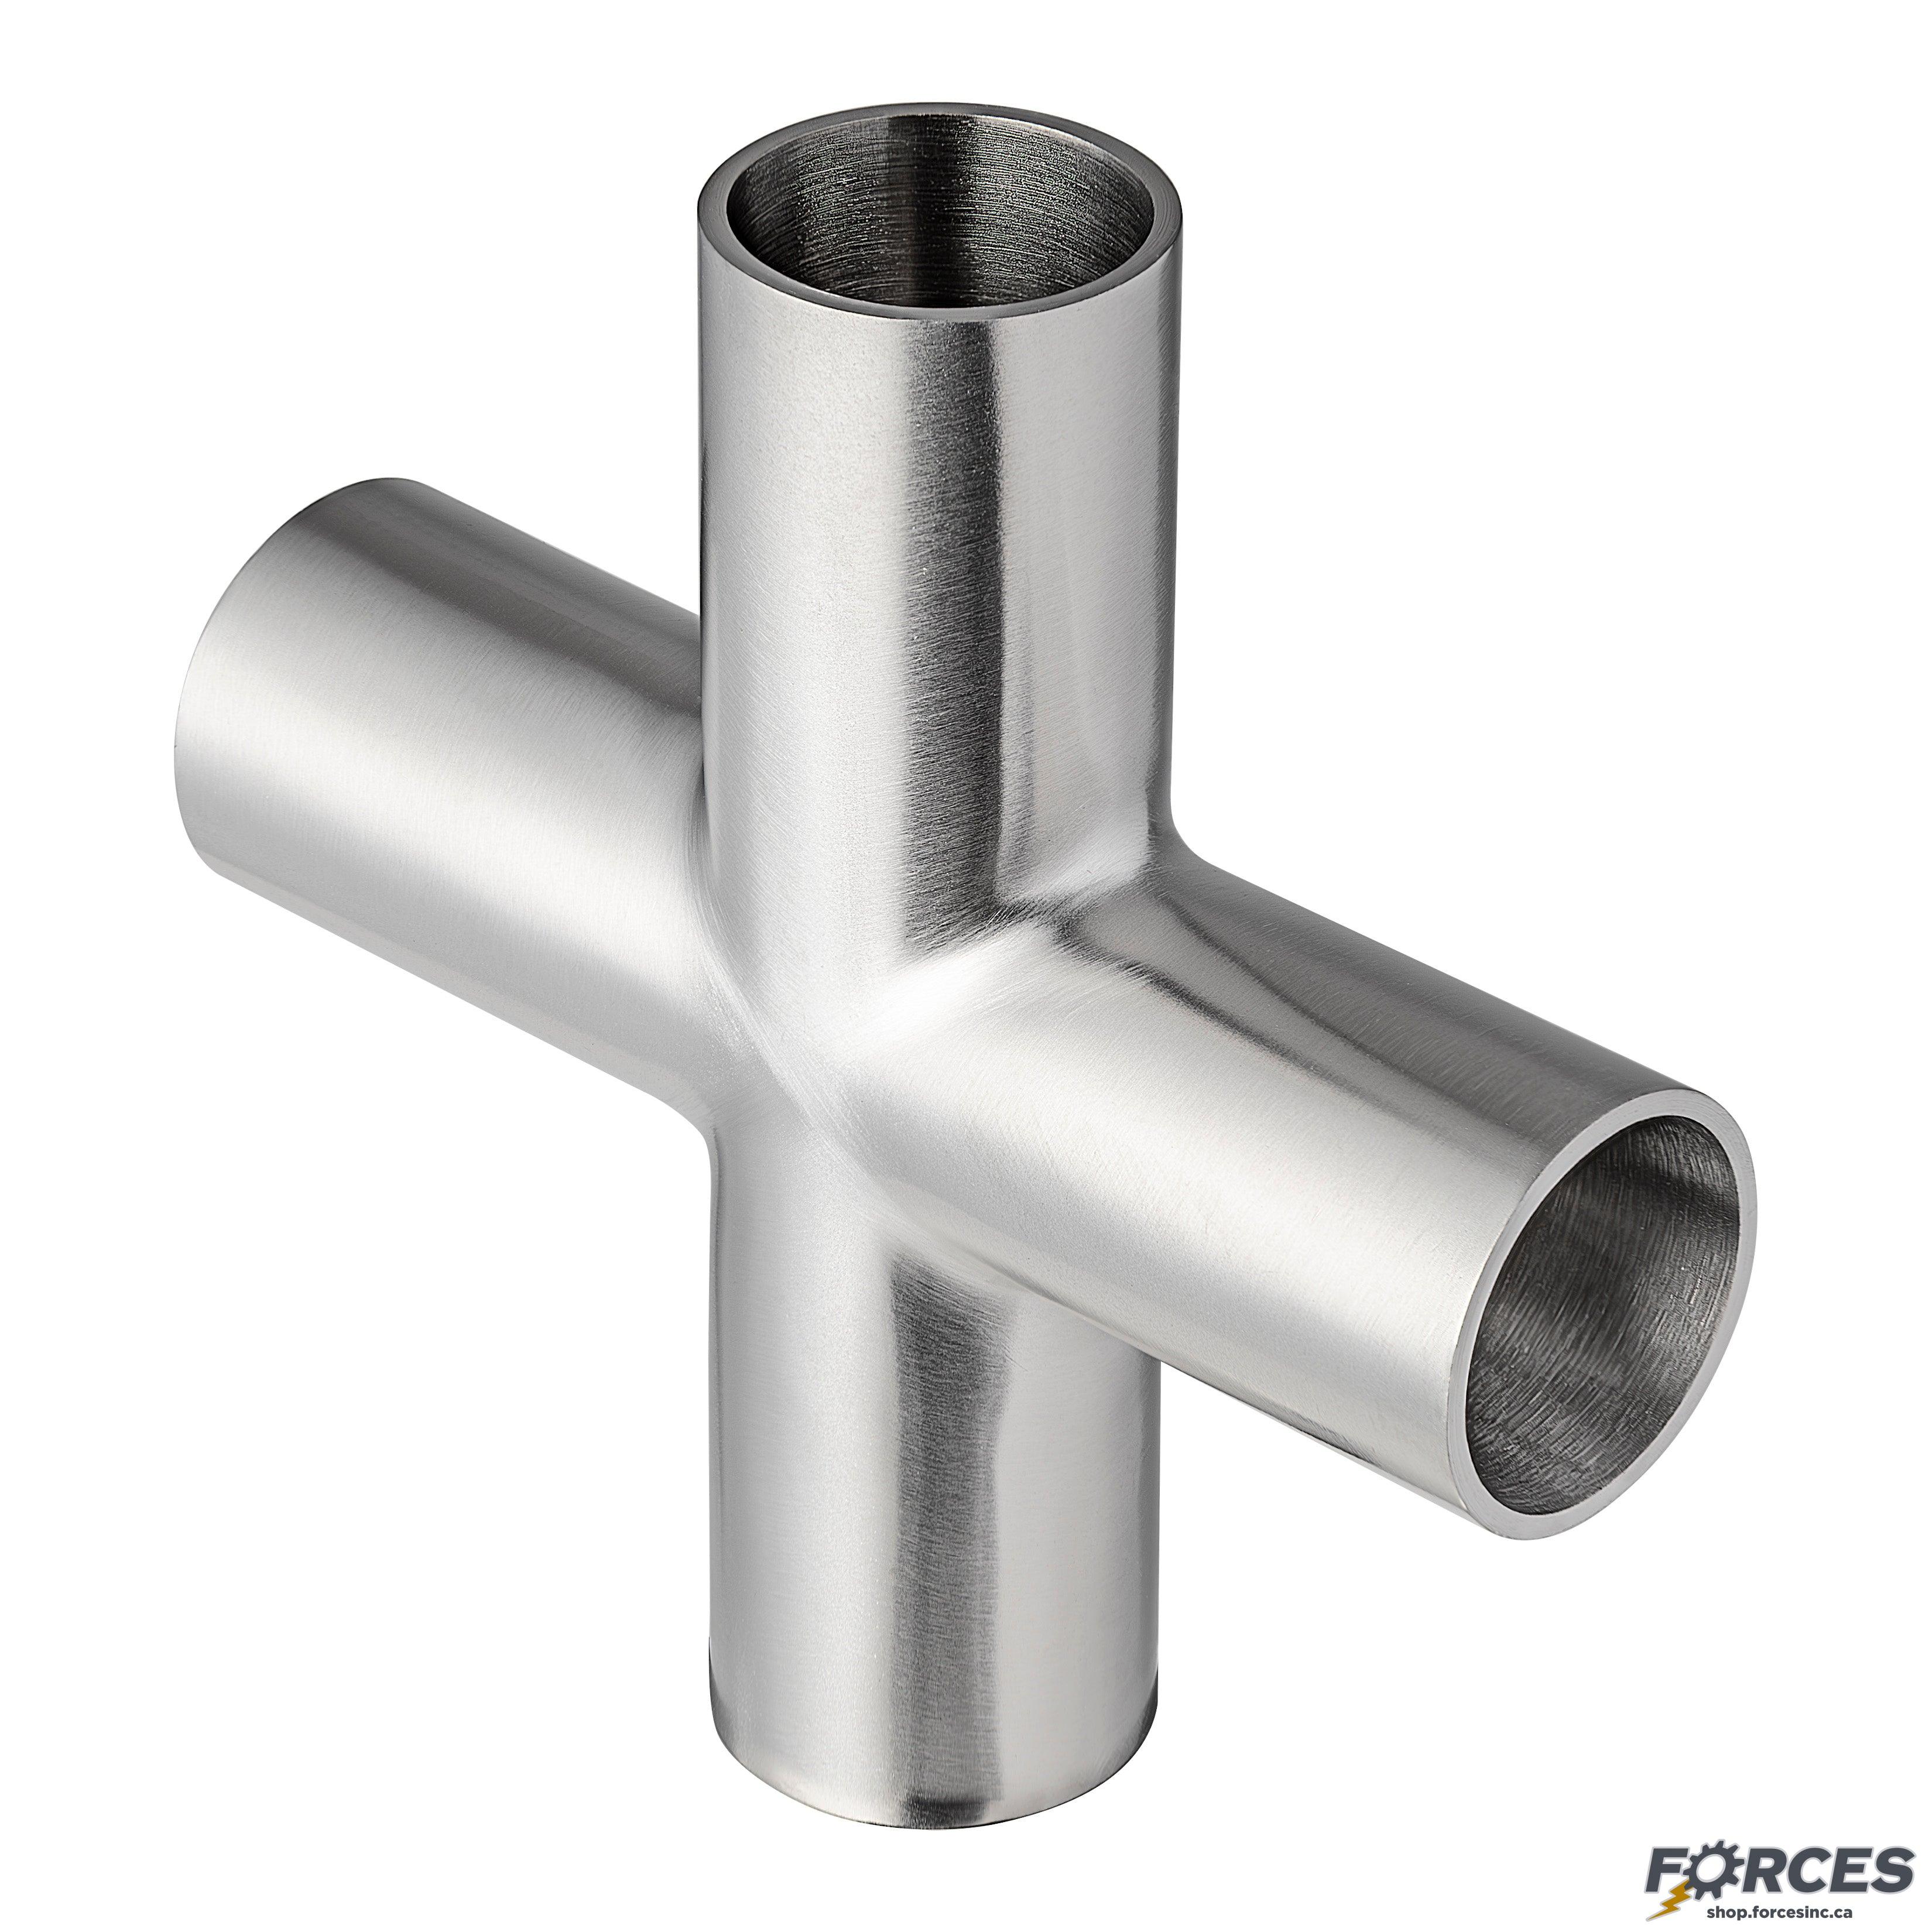 1" Butt Weld long Cross - Stainless Steel 316 - Forces Inc